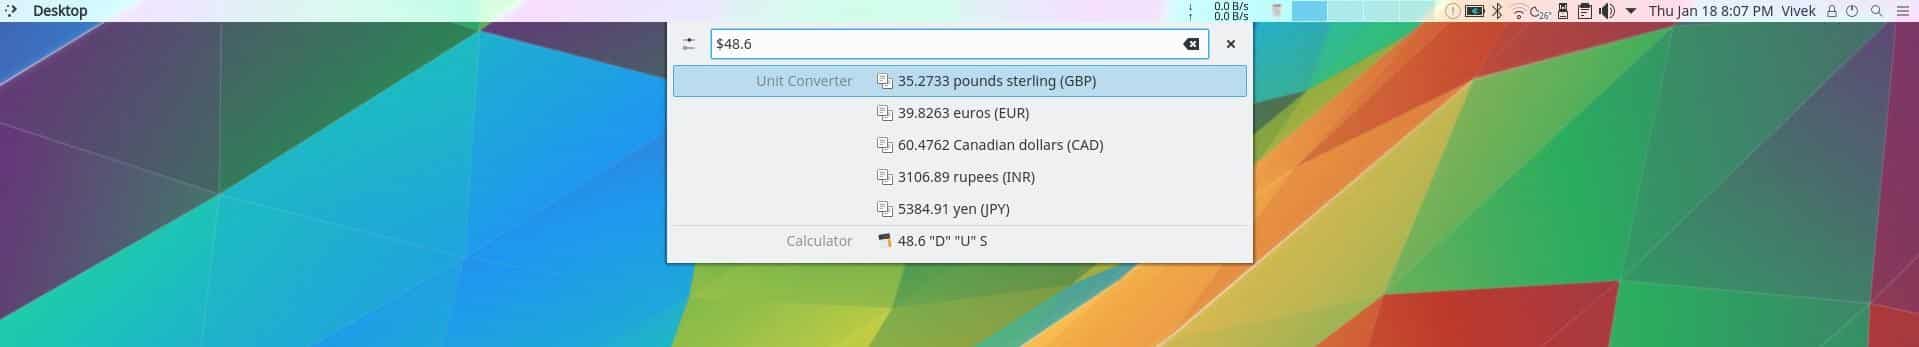 How To Get Started With KDE Plasma 5.11